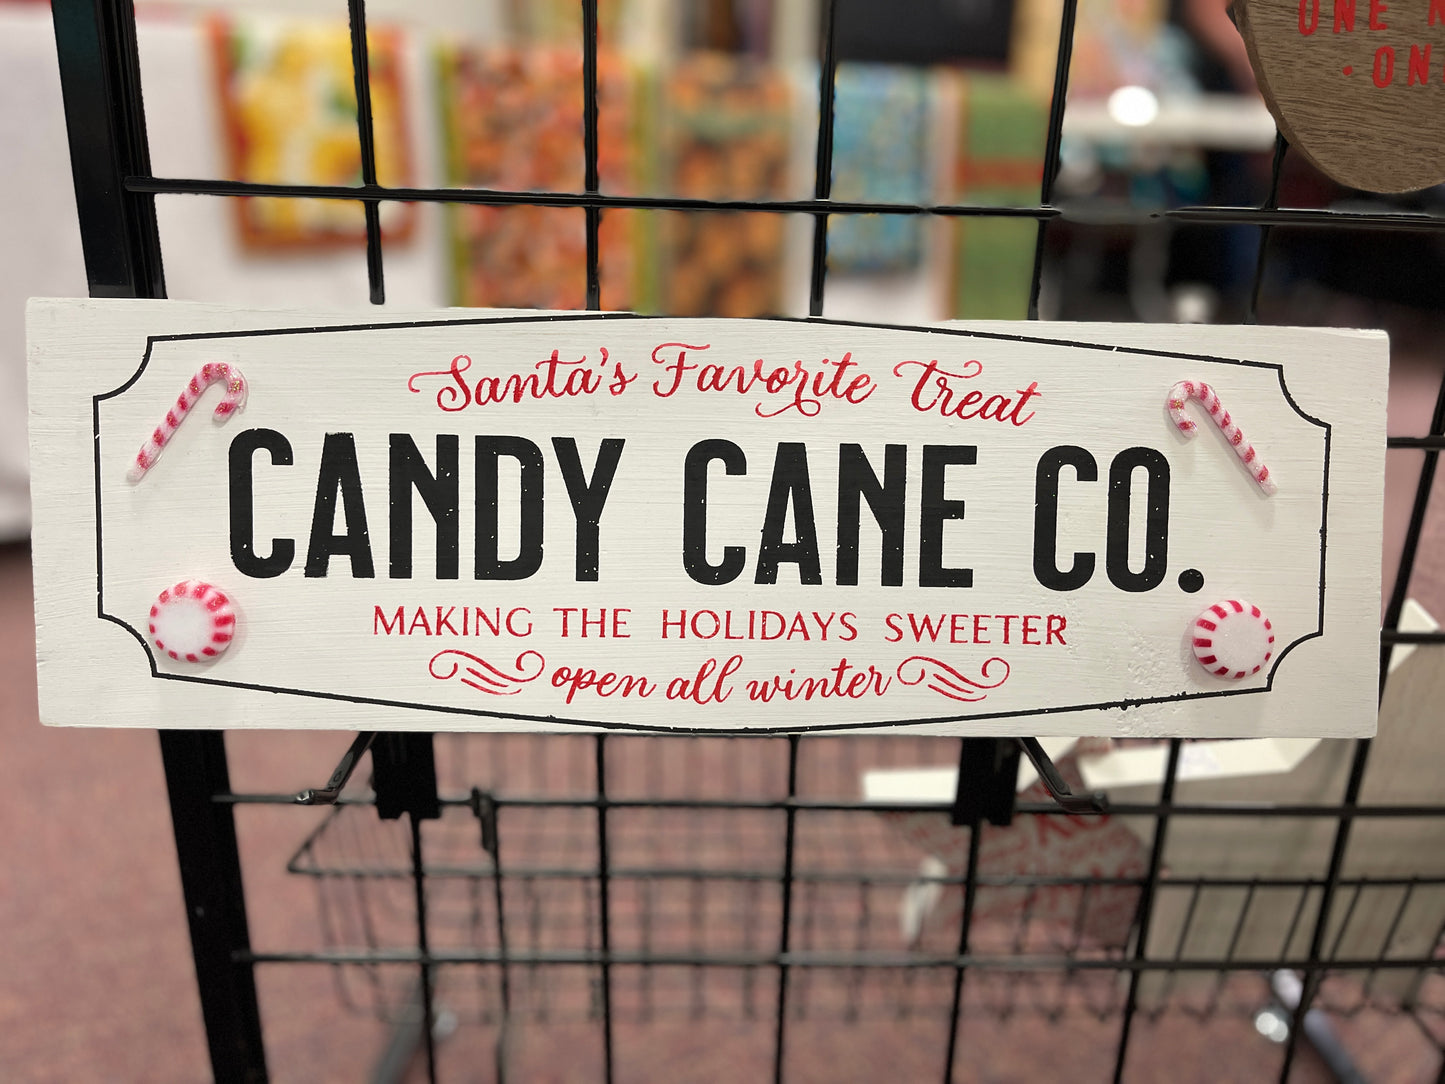 Candy Cane Co. Sign